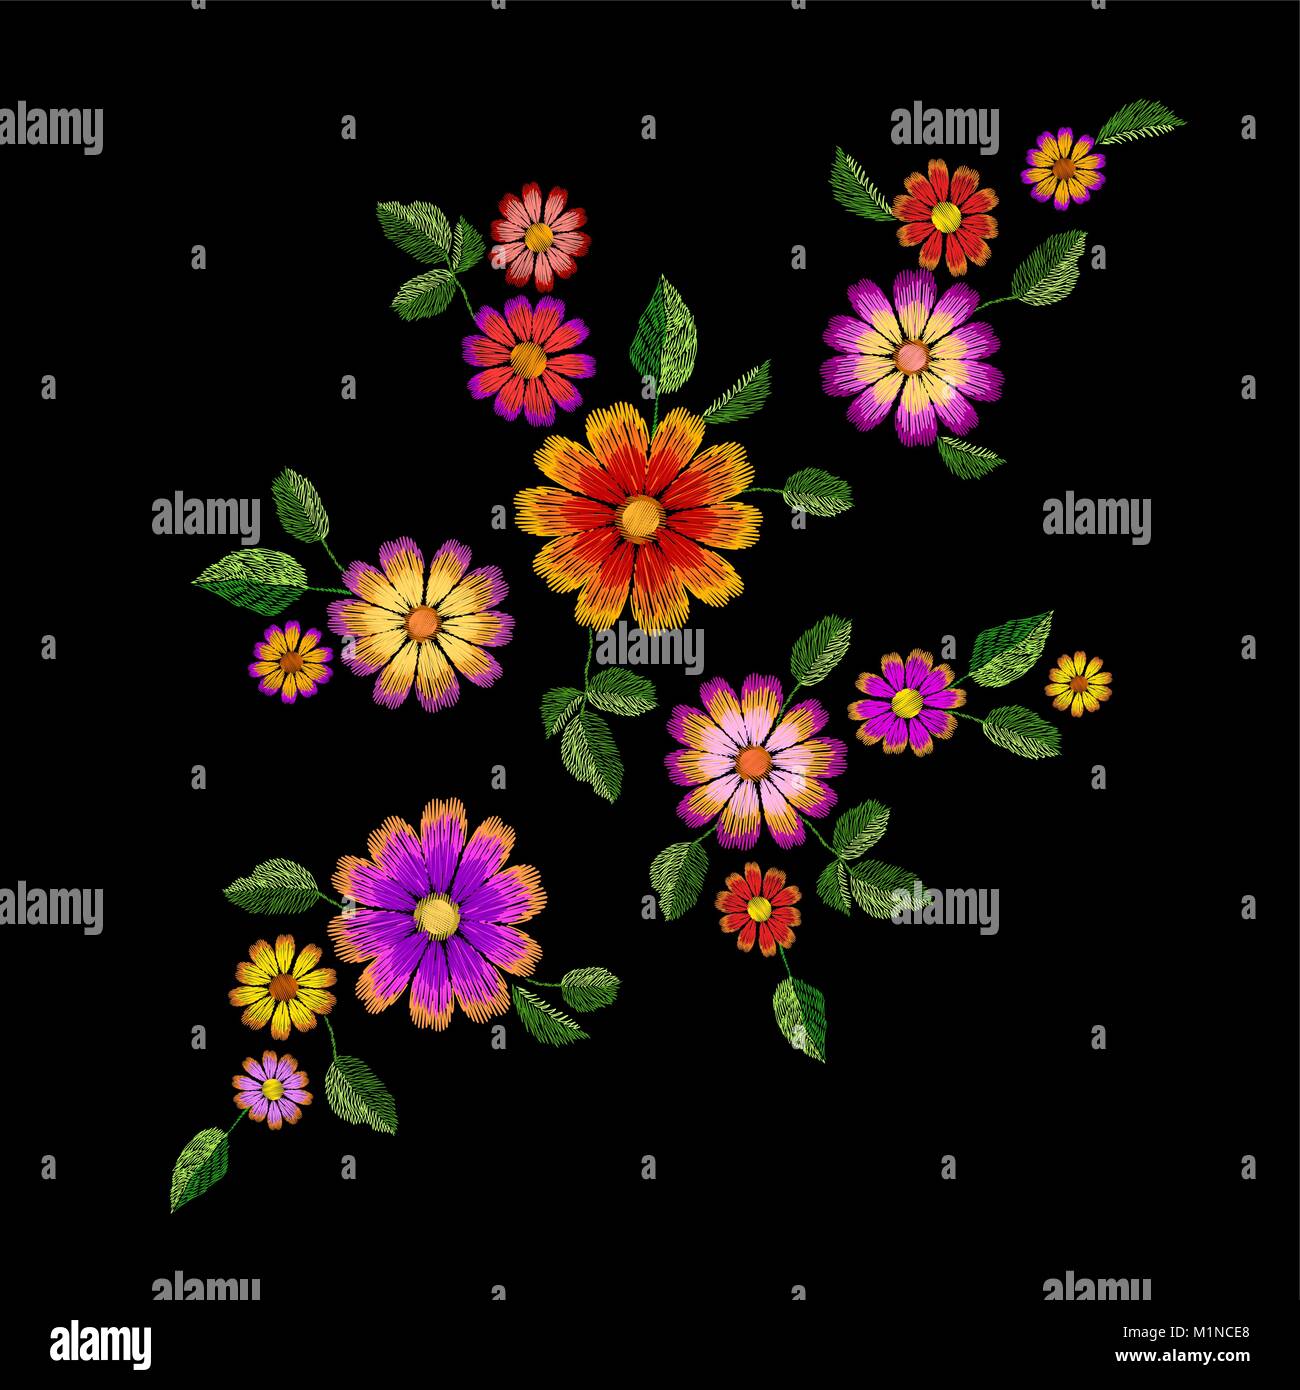 Bright flower embroidery colorful patch. Fashion decoration stitched texture template. Ethnic traditional daisy field plant leaves textile print design vector illustration Stock Vector